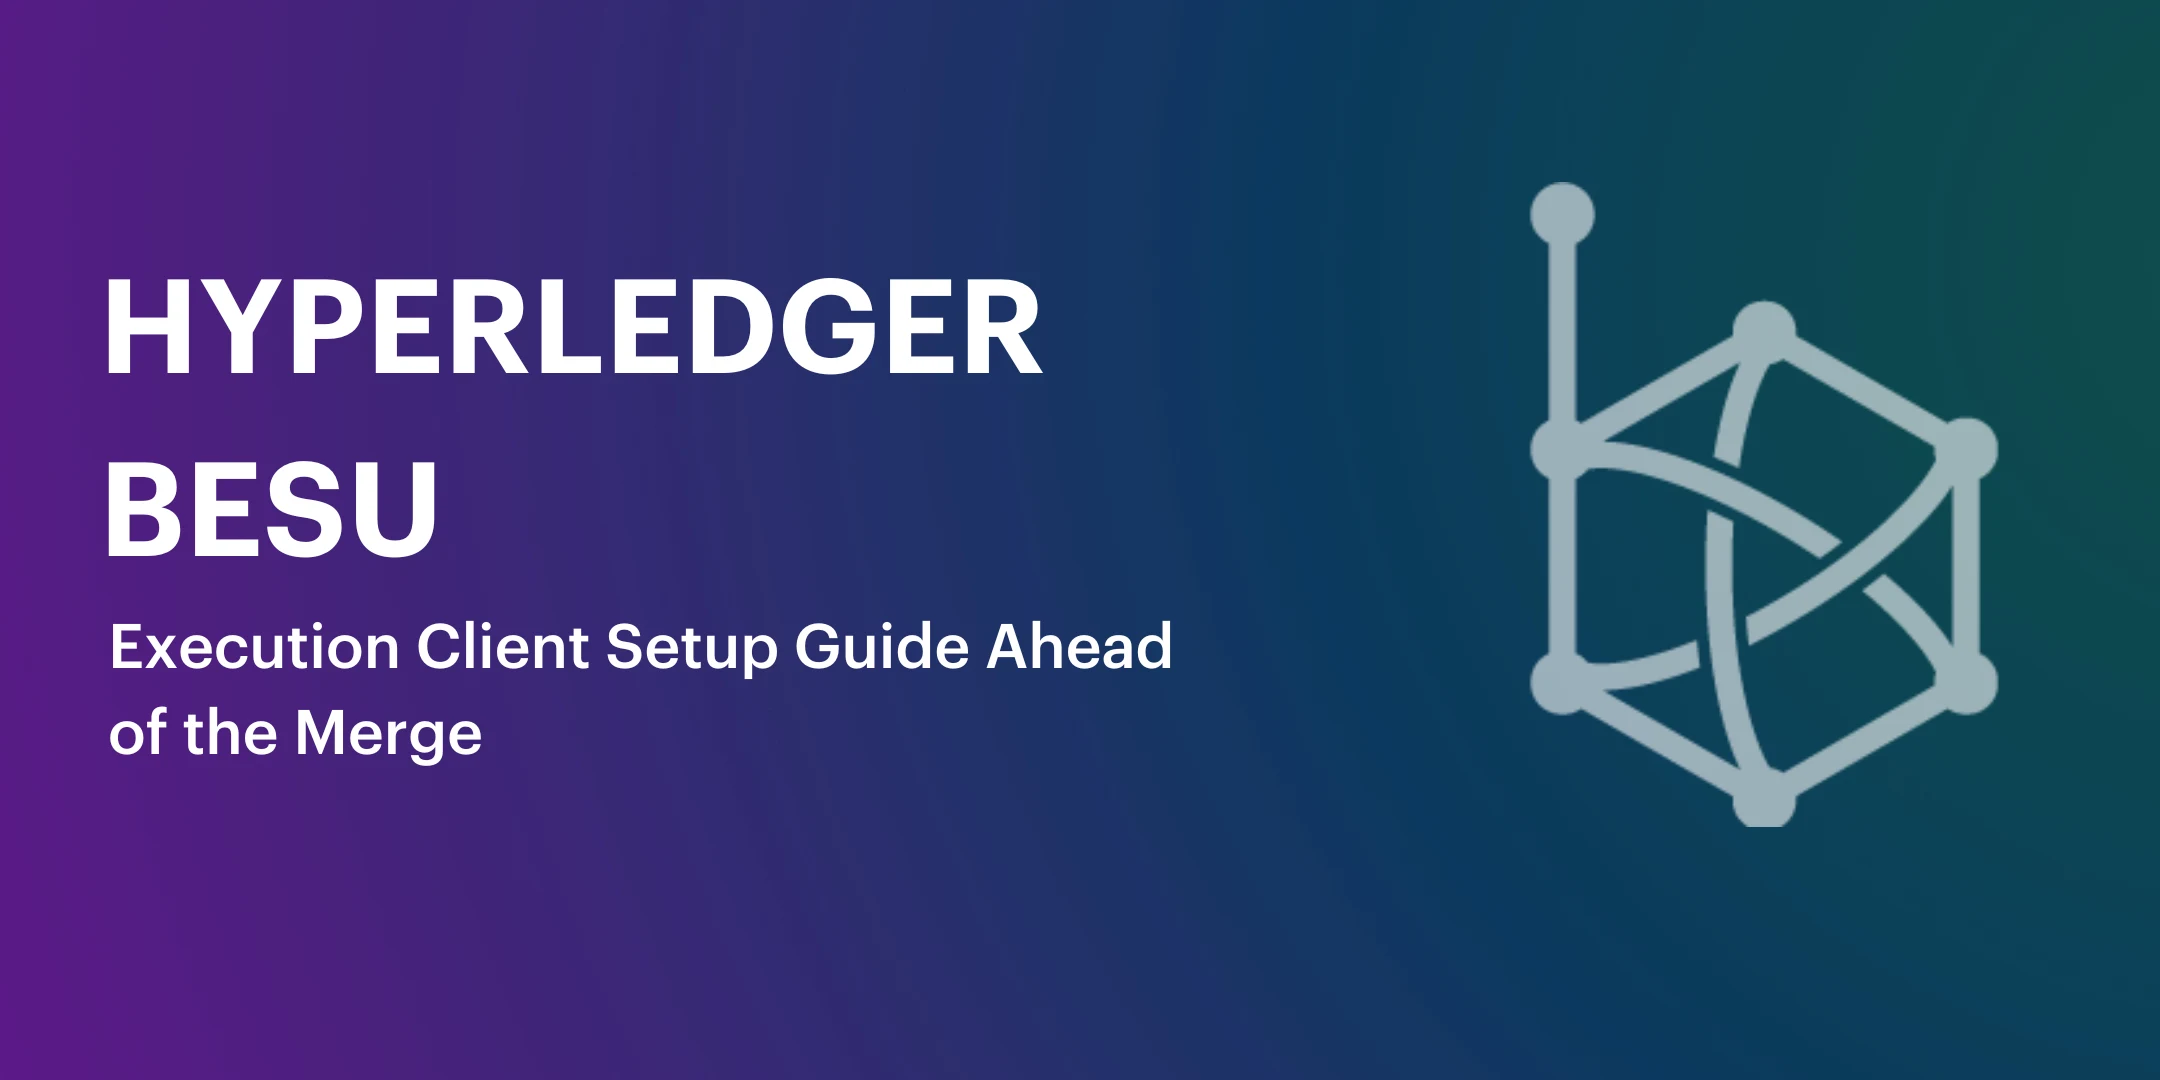 Image: Hyperledger Besu Execution Client Setup Guide Ahead of the Merge